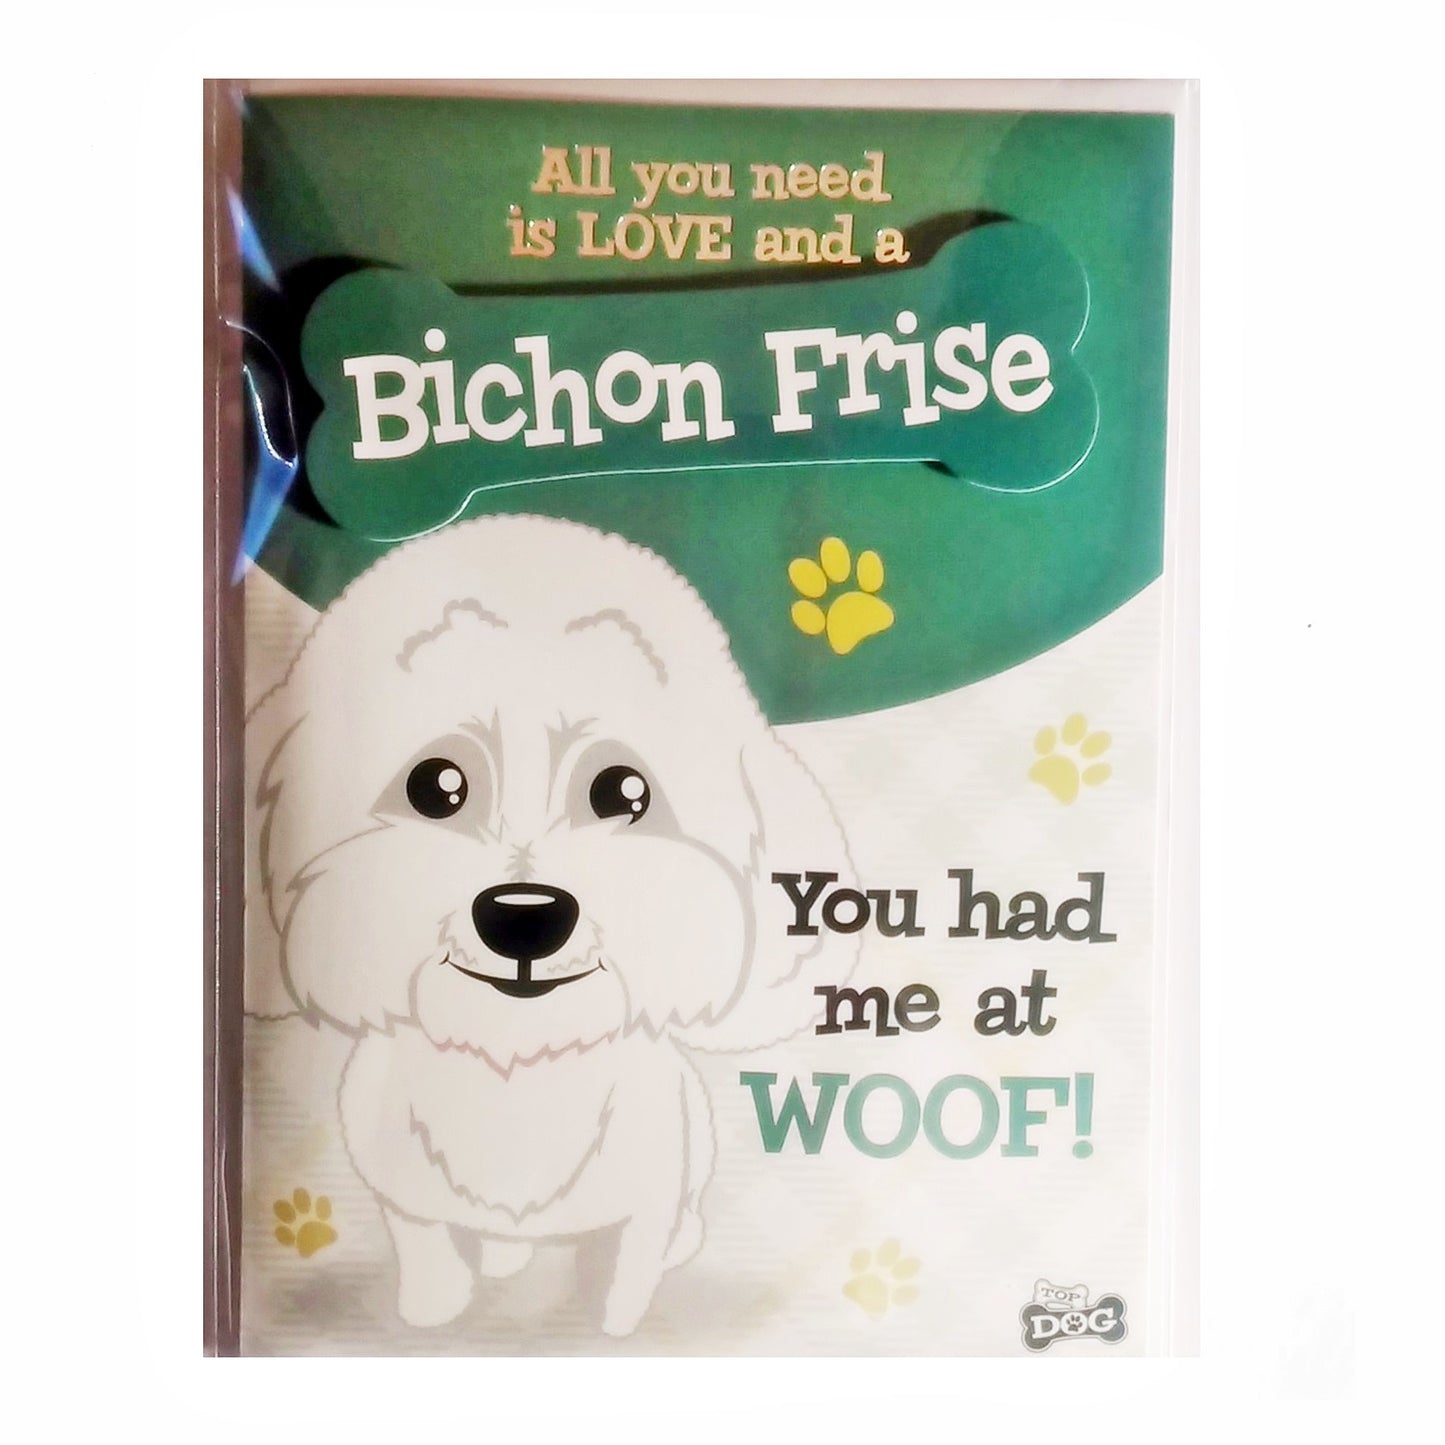 Wags & Whiskers Dog Greeting Card "Bichon Frise" by Paper Island